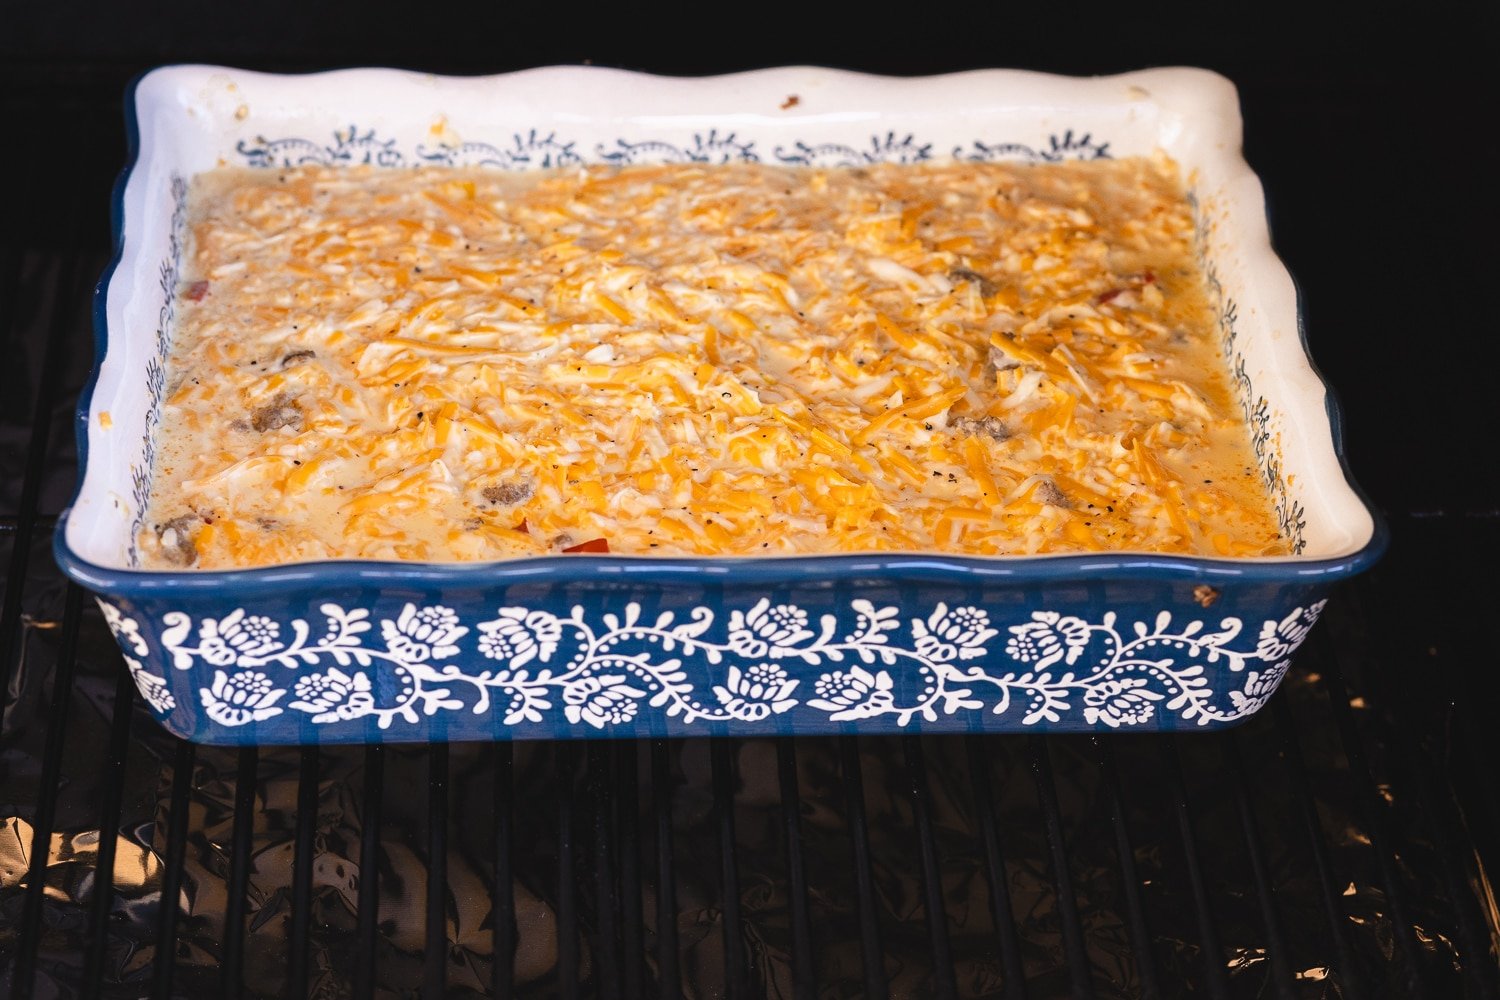 Casserole dish filled with eggs, cheese, sausage and hashbrowns on a smoker.